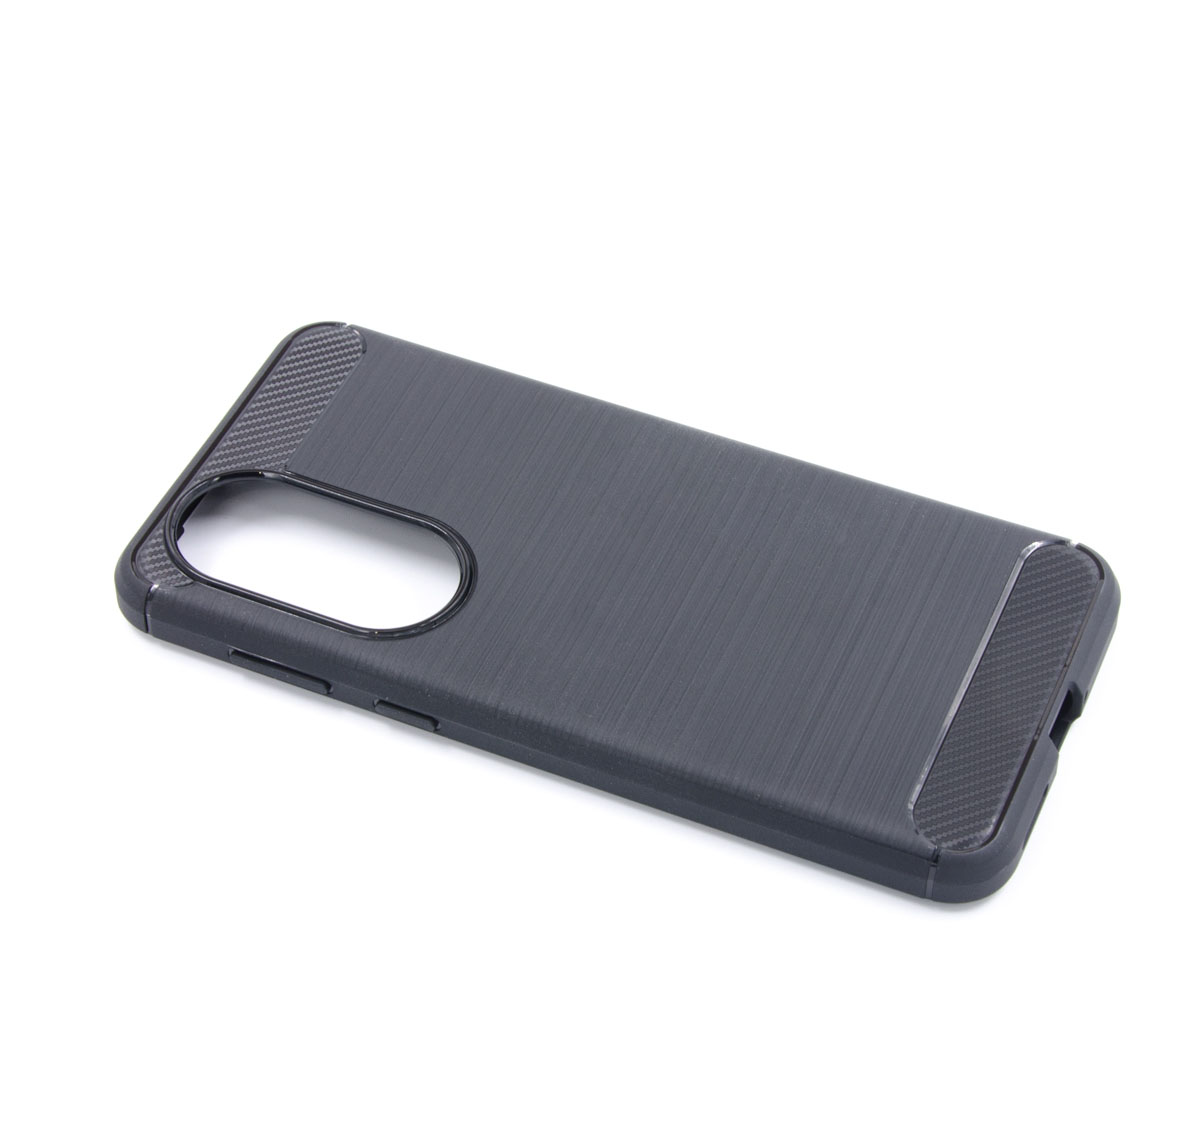 Tpu brushed new for p50 (black)